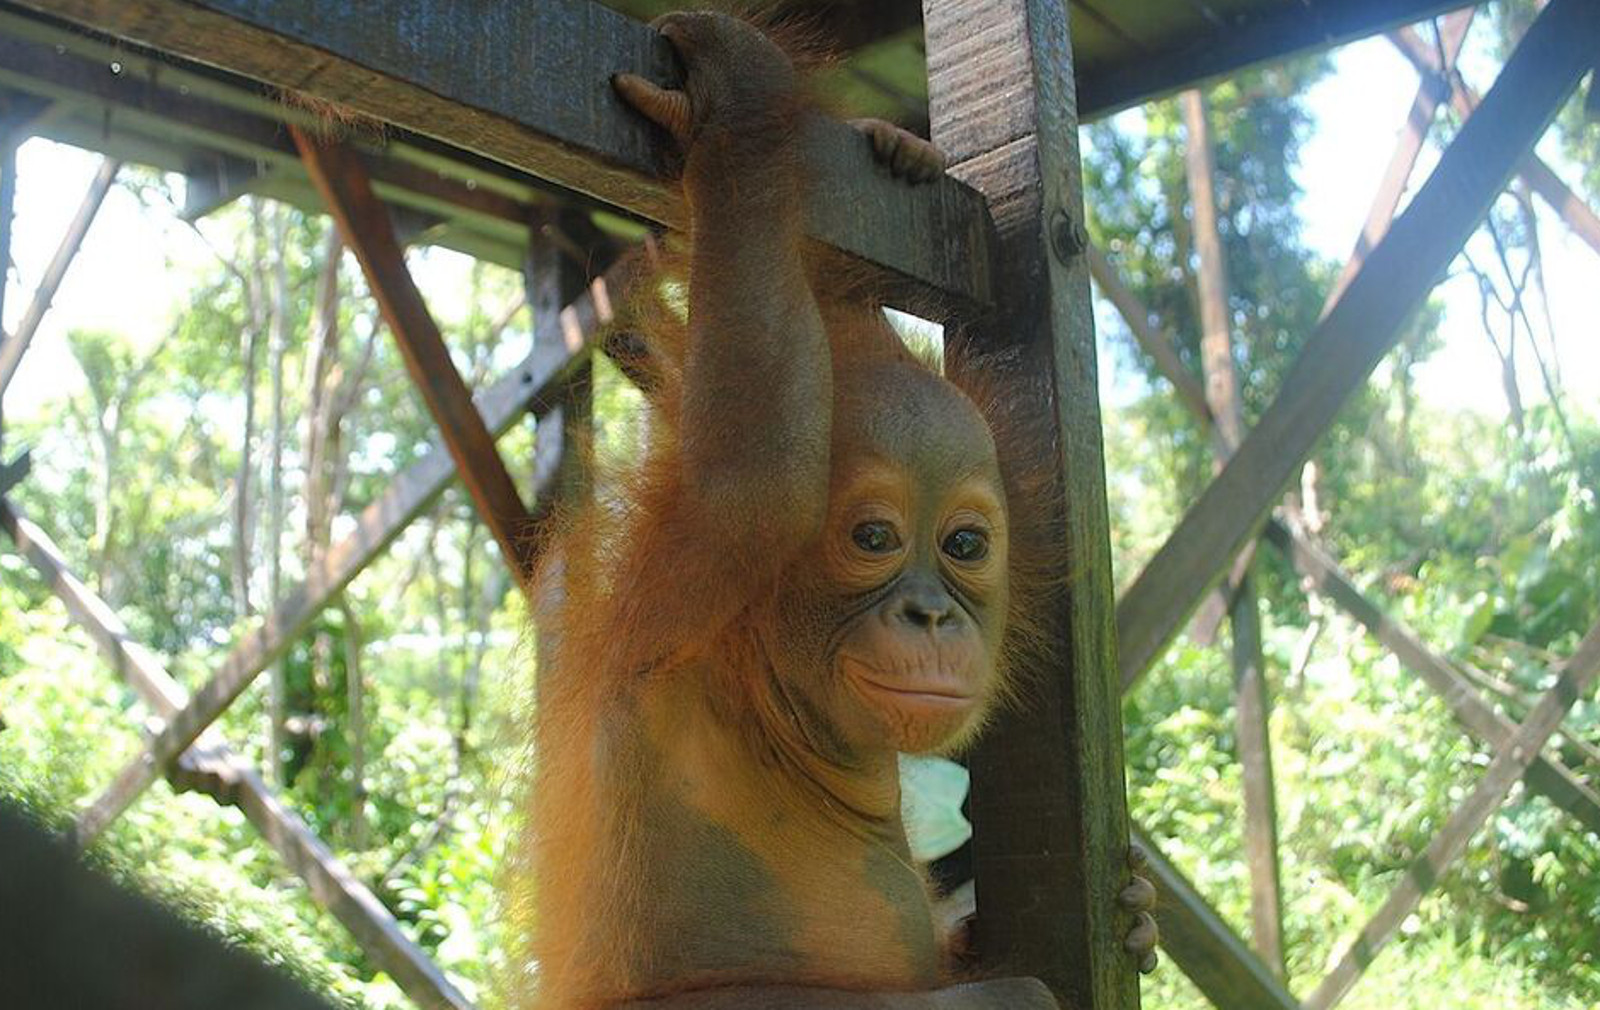 These 5 Animals Rescued From the Wildlife Trade and are Getting a Second Chance